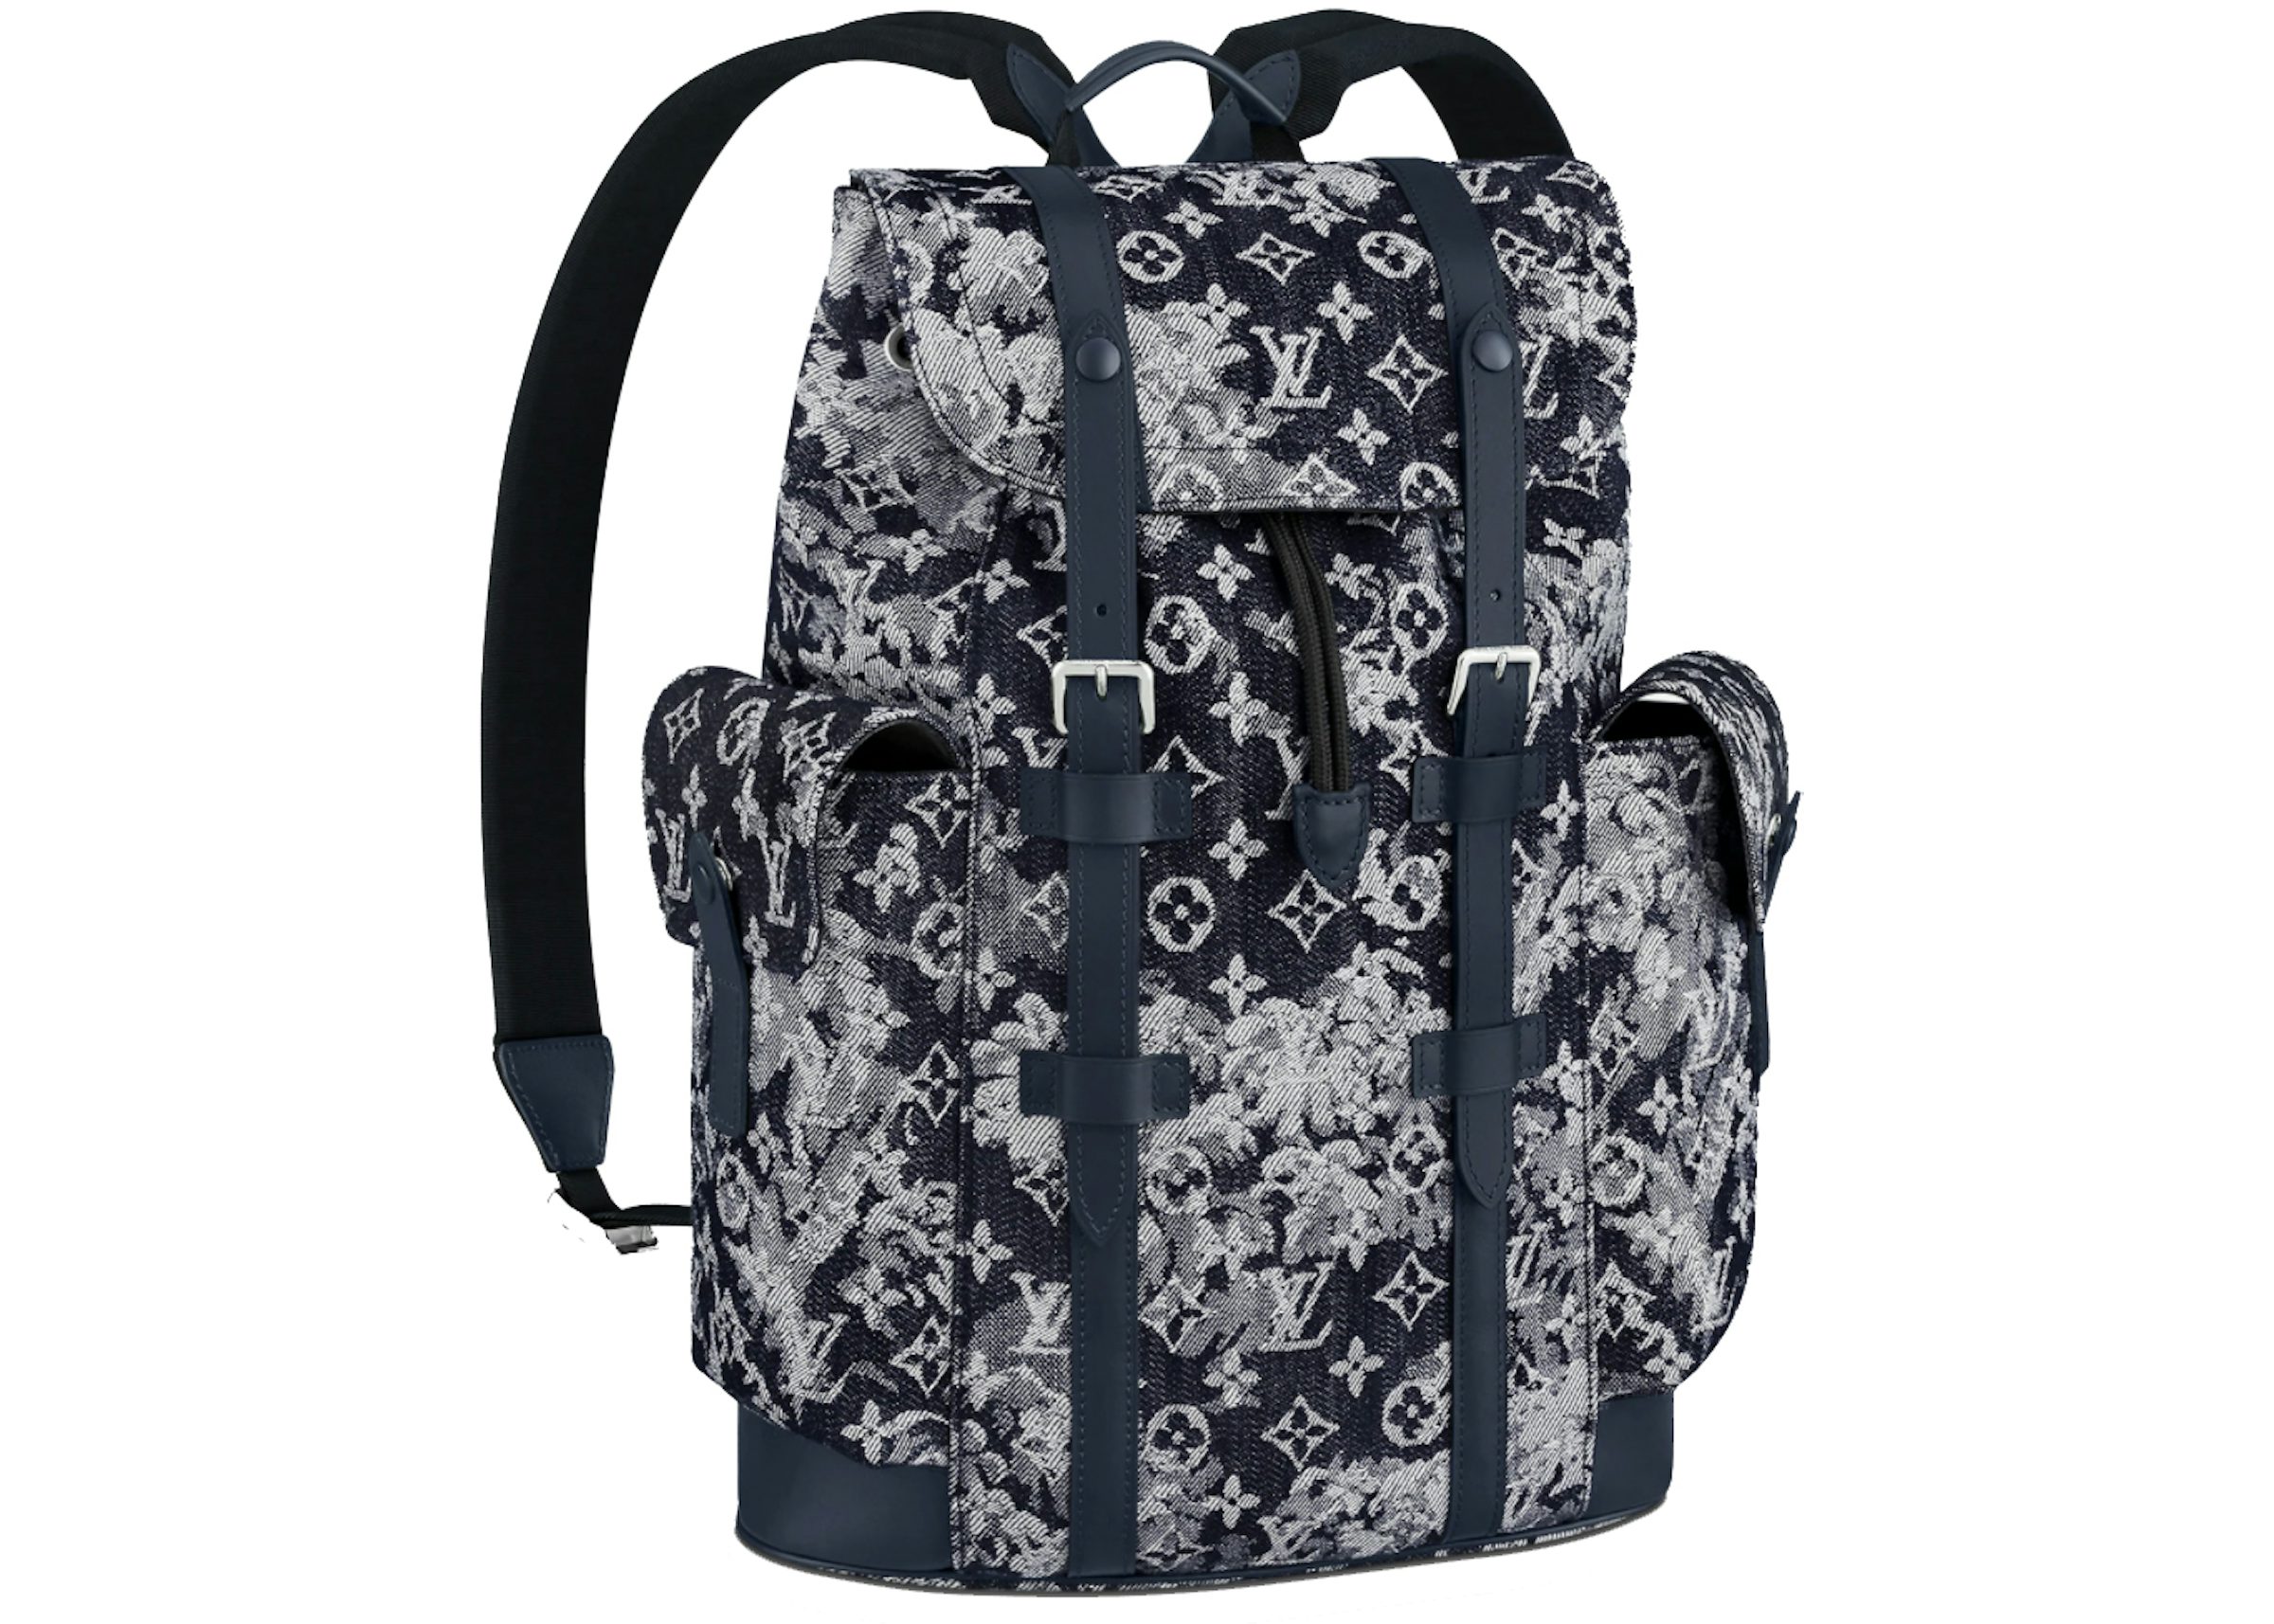 christopher backpack louis vuittons